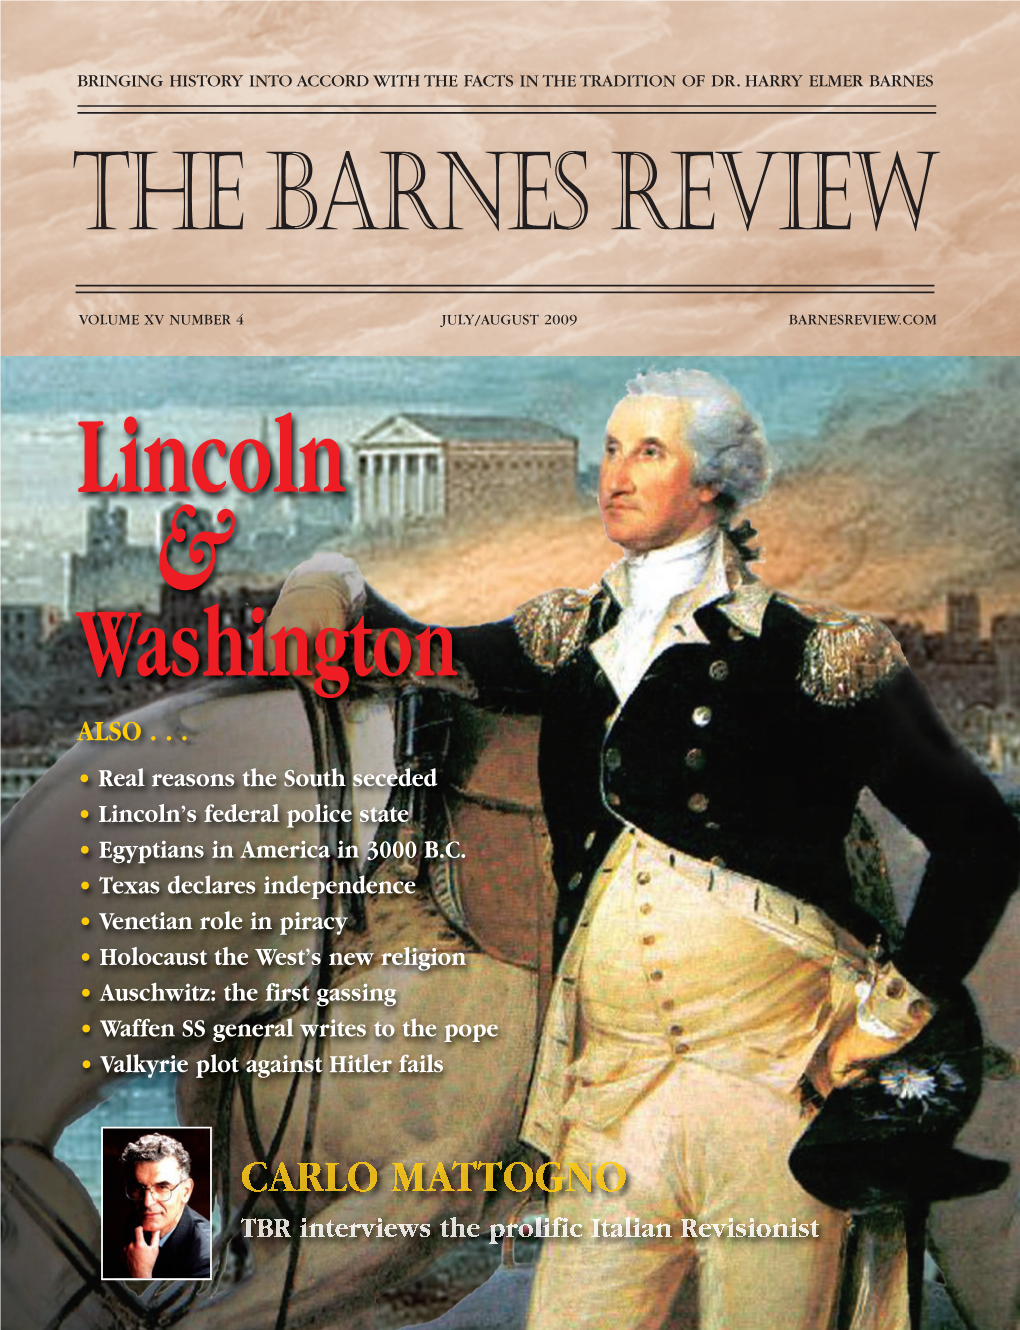 The Barnes Review